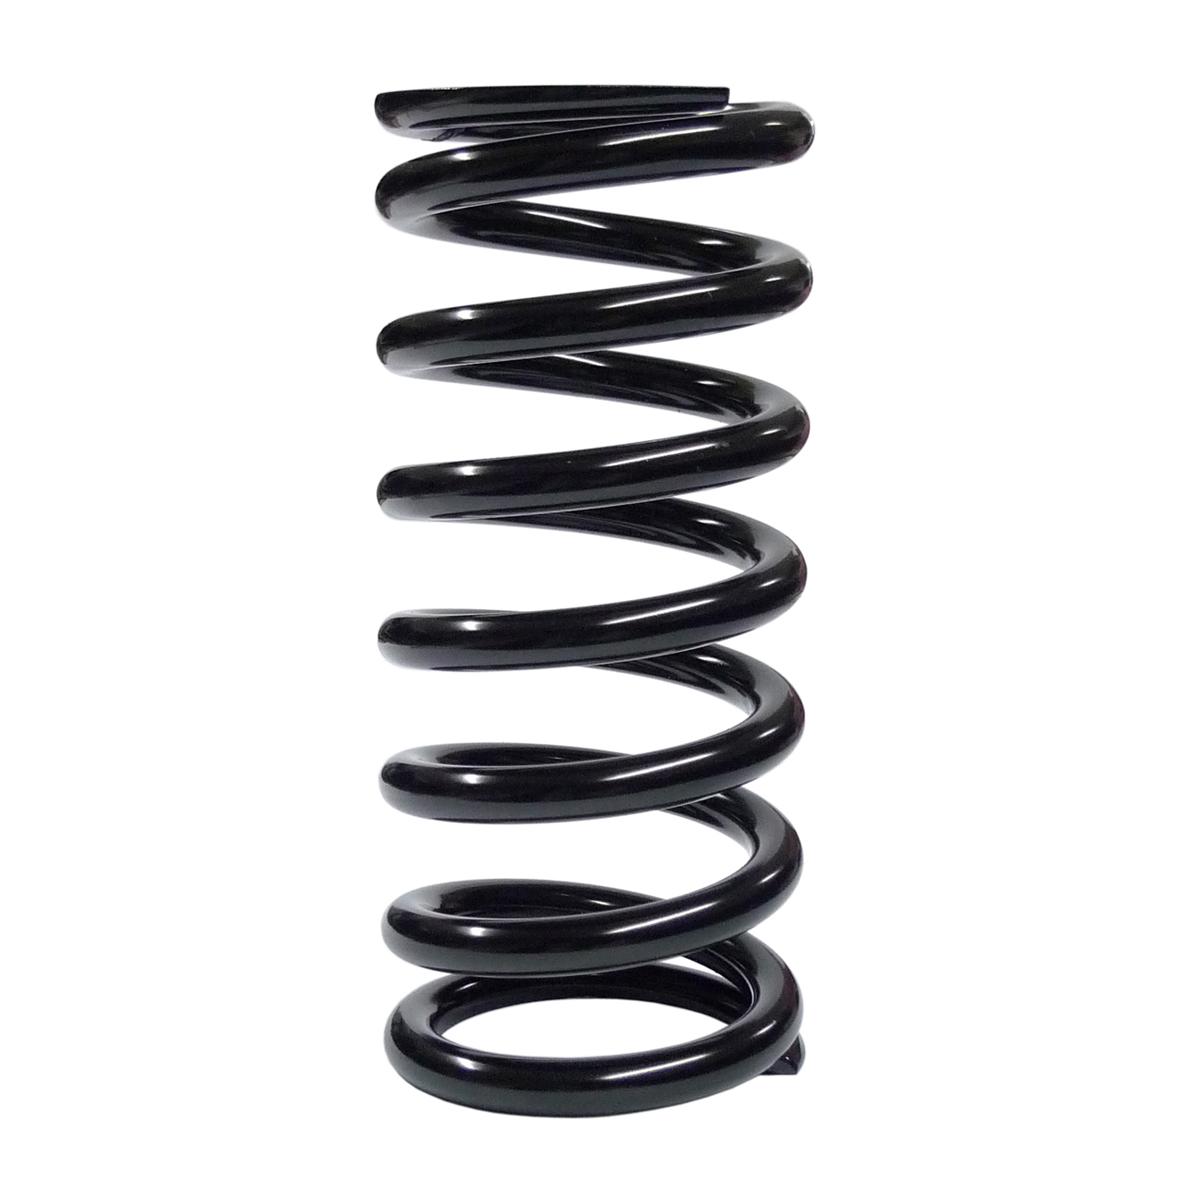 Coilover Spring Faulkner 14 Inches Long with 2.25 Inch Inside Diameter